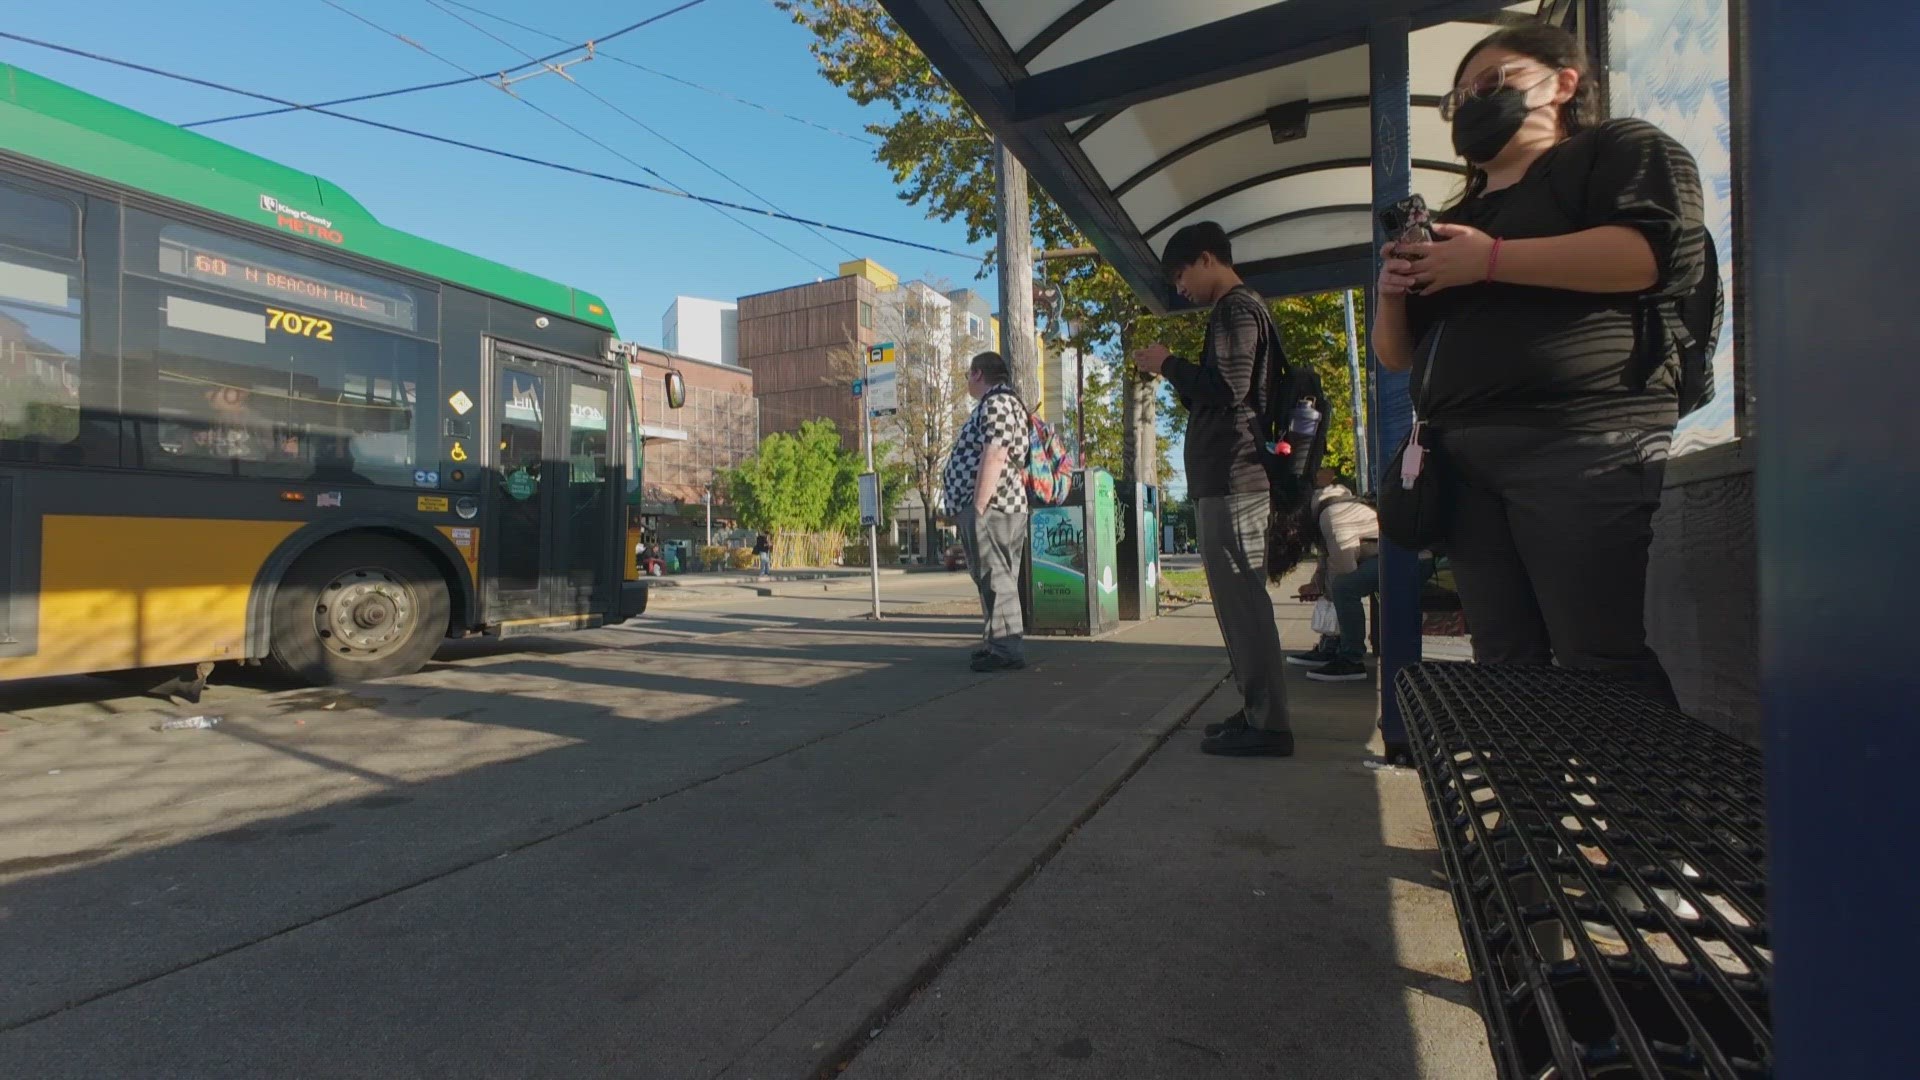 The incident happened at the Beacon Hill station last Thursday shortly before 4 p.m. when a man allegedly struck two people with a hammer before escaping.